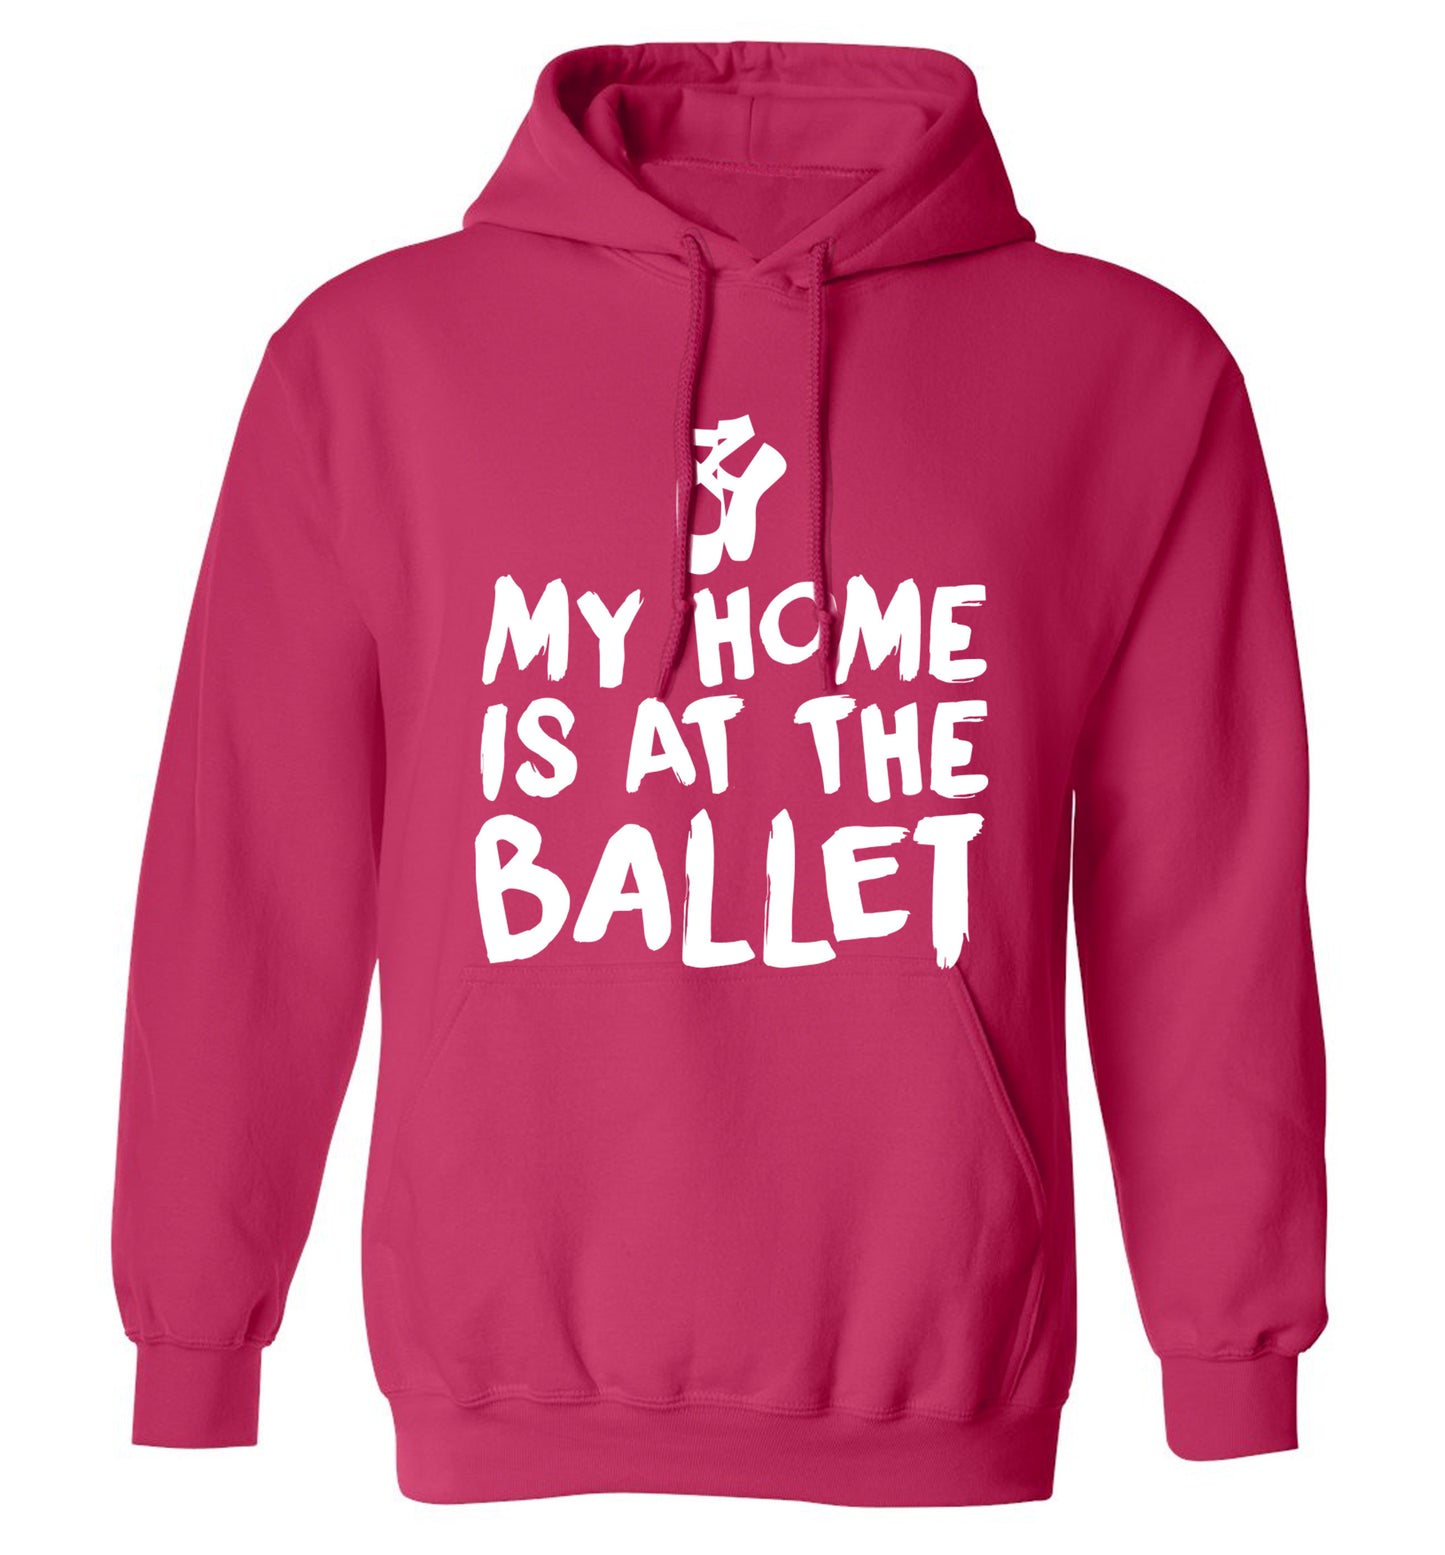 My home is at the ballet adults unisex pink hoodie 2XL